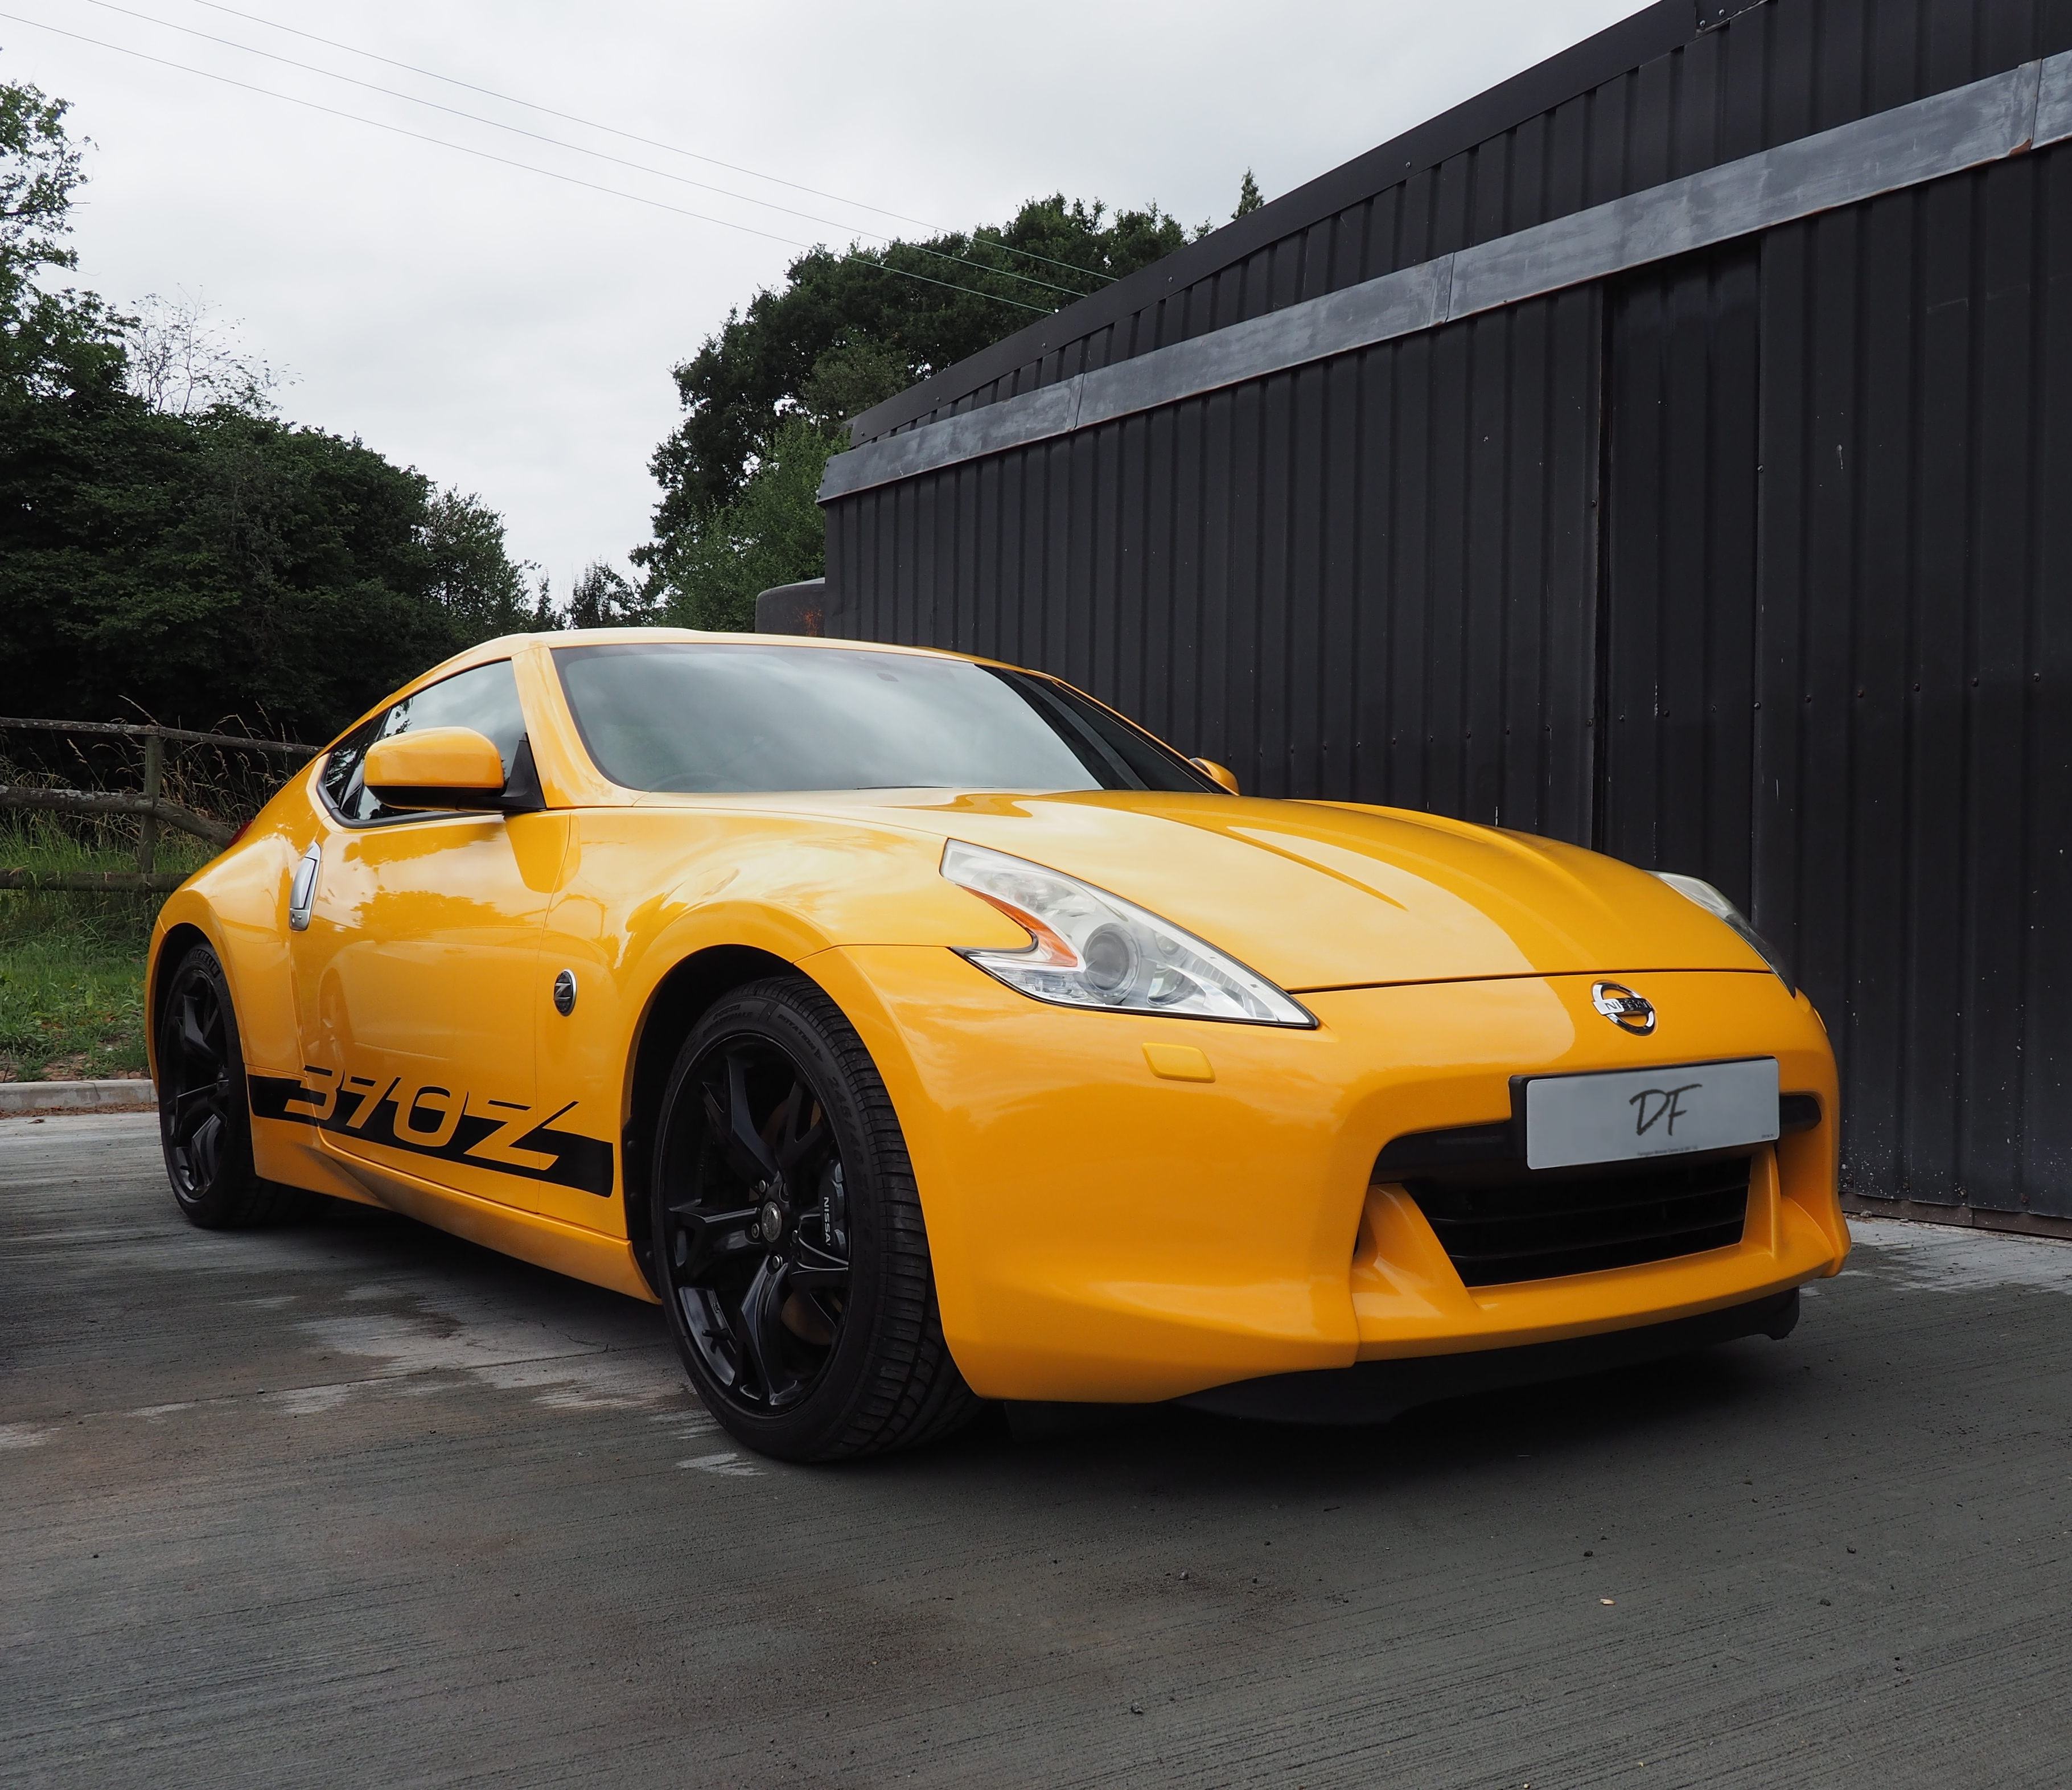 A rare ultimate yellow 370z, in-front of a contrasting dark grey industrial sliding door, the sky and surroundings reflecting of its pristine paintwork, enhanced by a generous layering of paint sealant and graphene based wax.